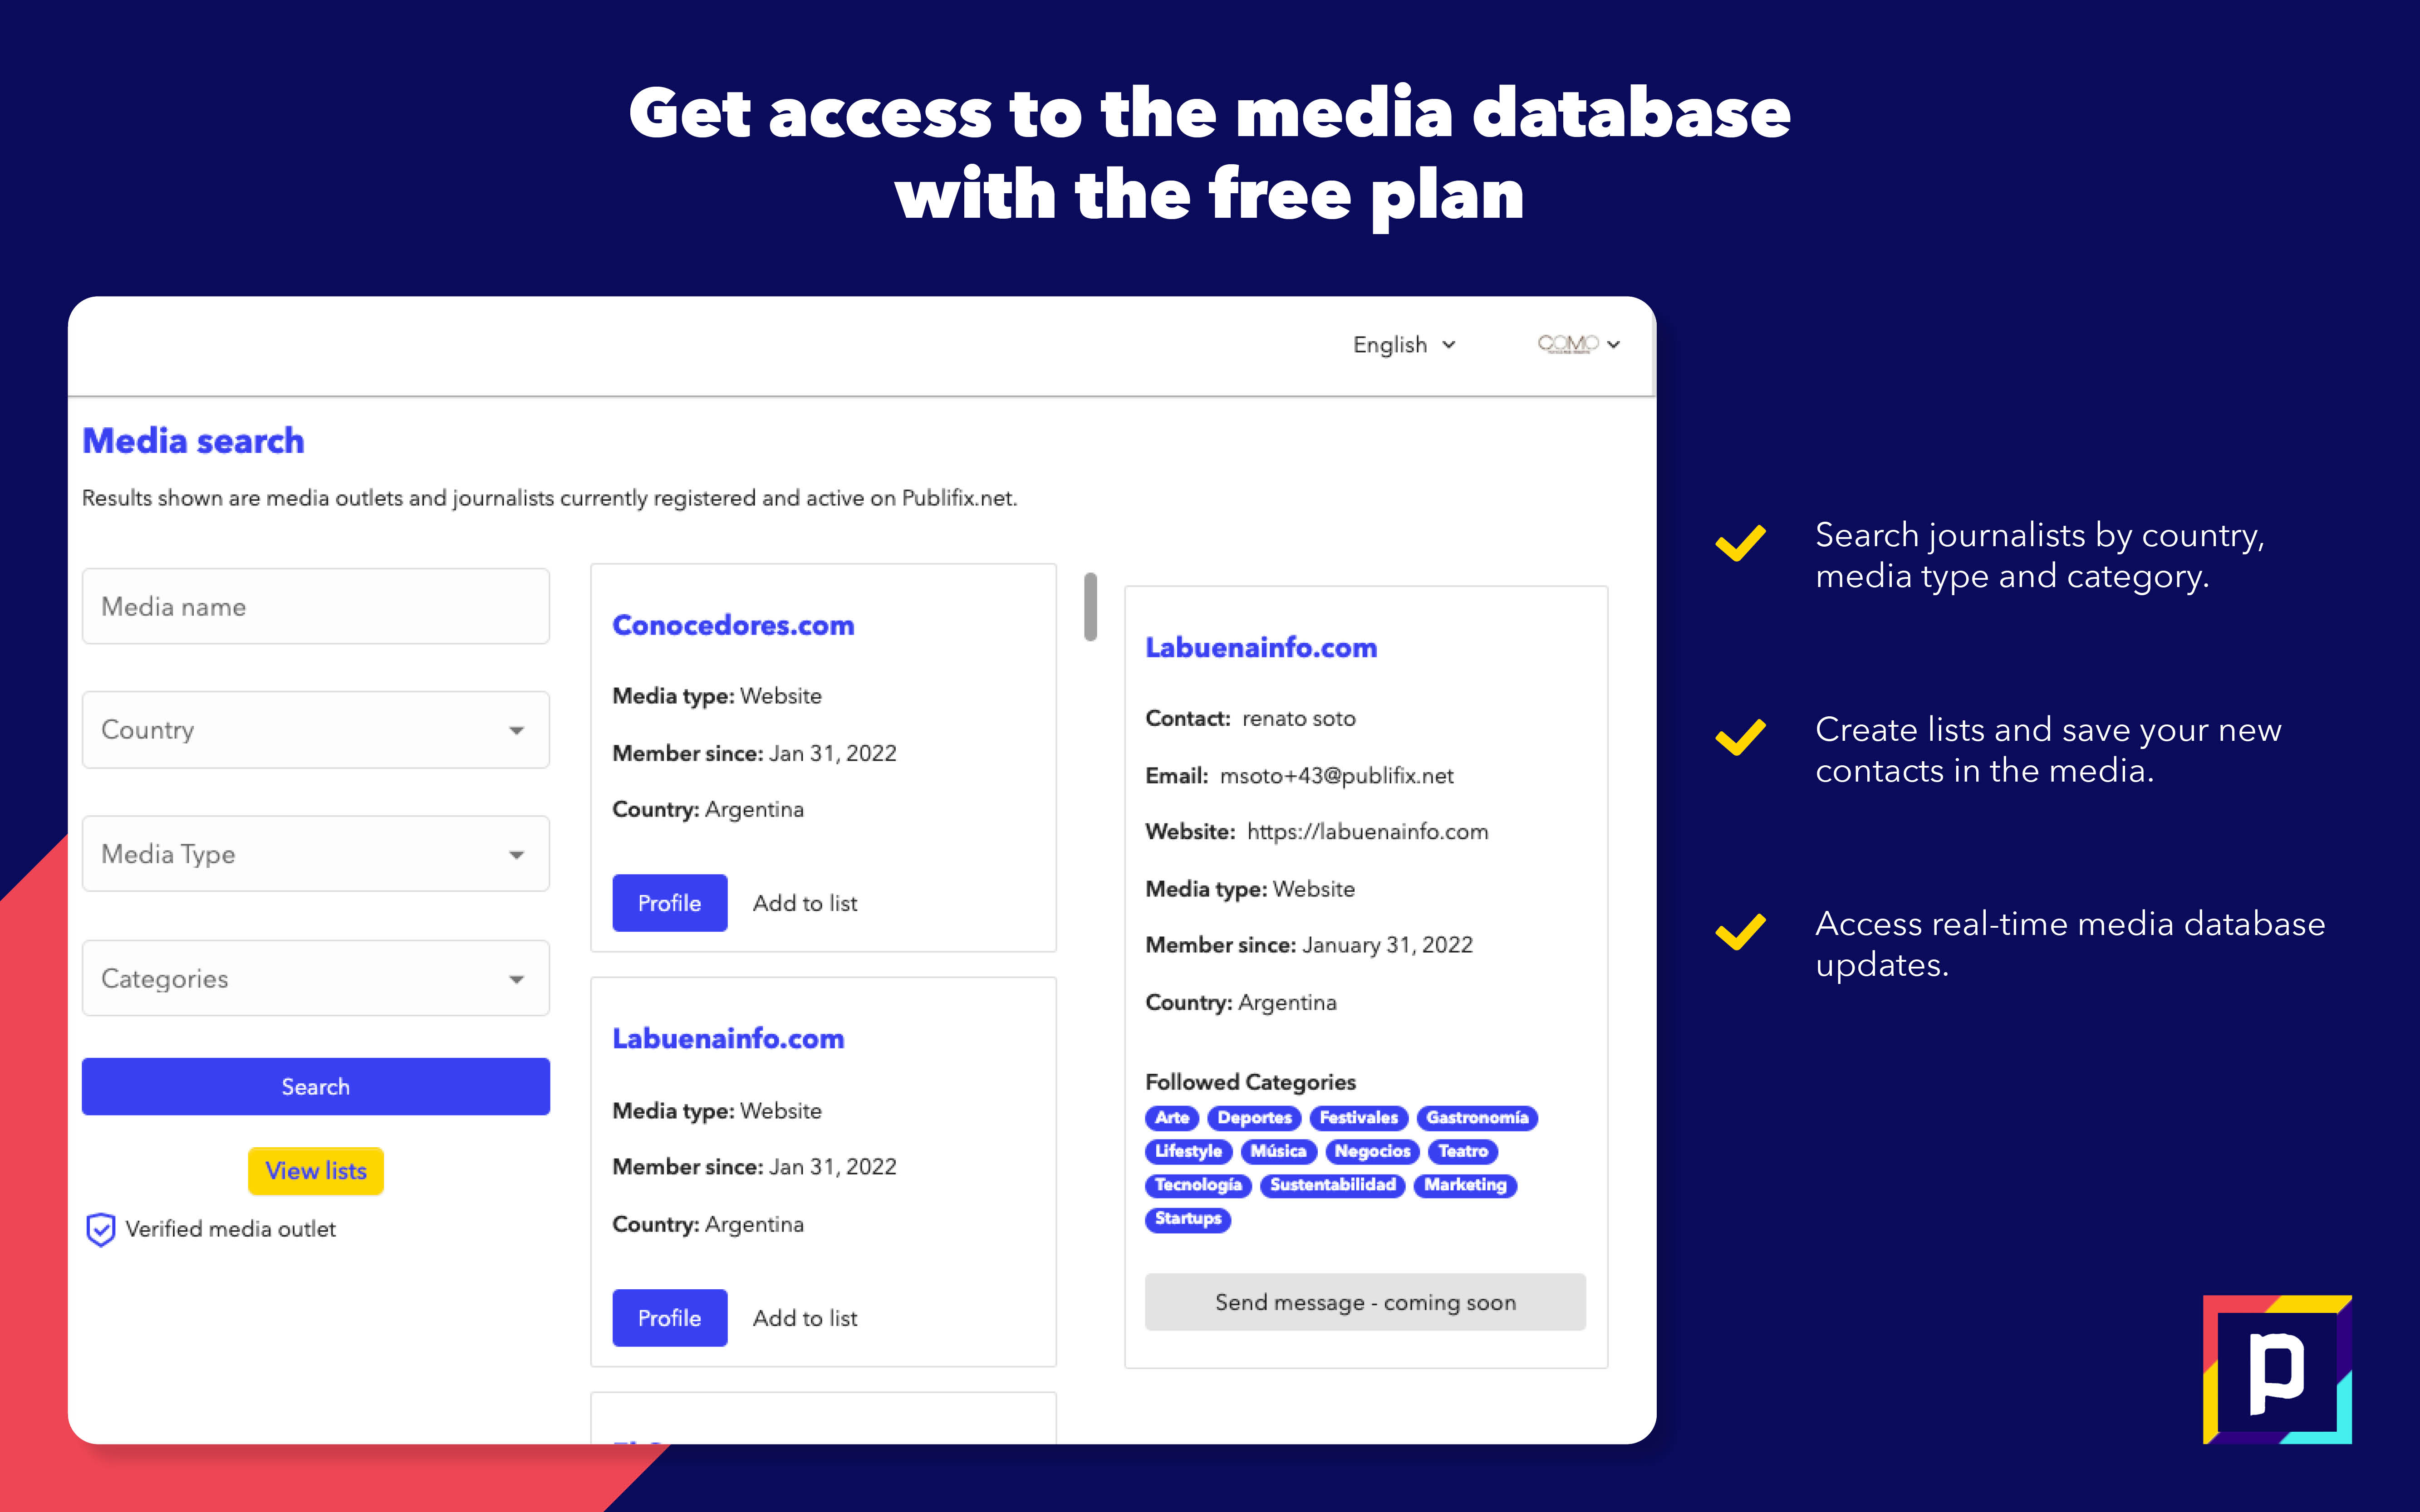 Get access to thousands of new media contacts